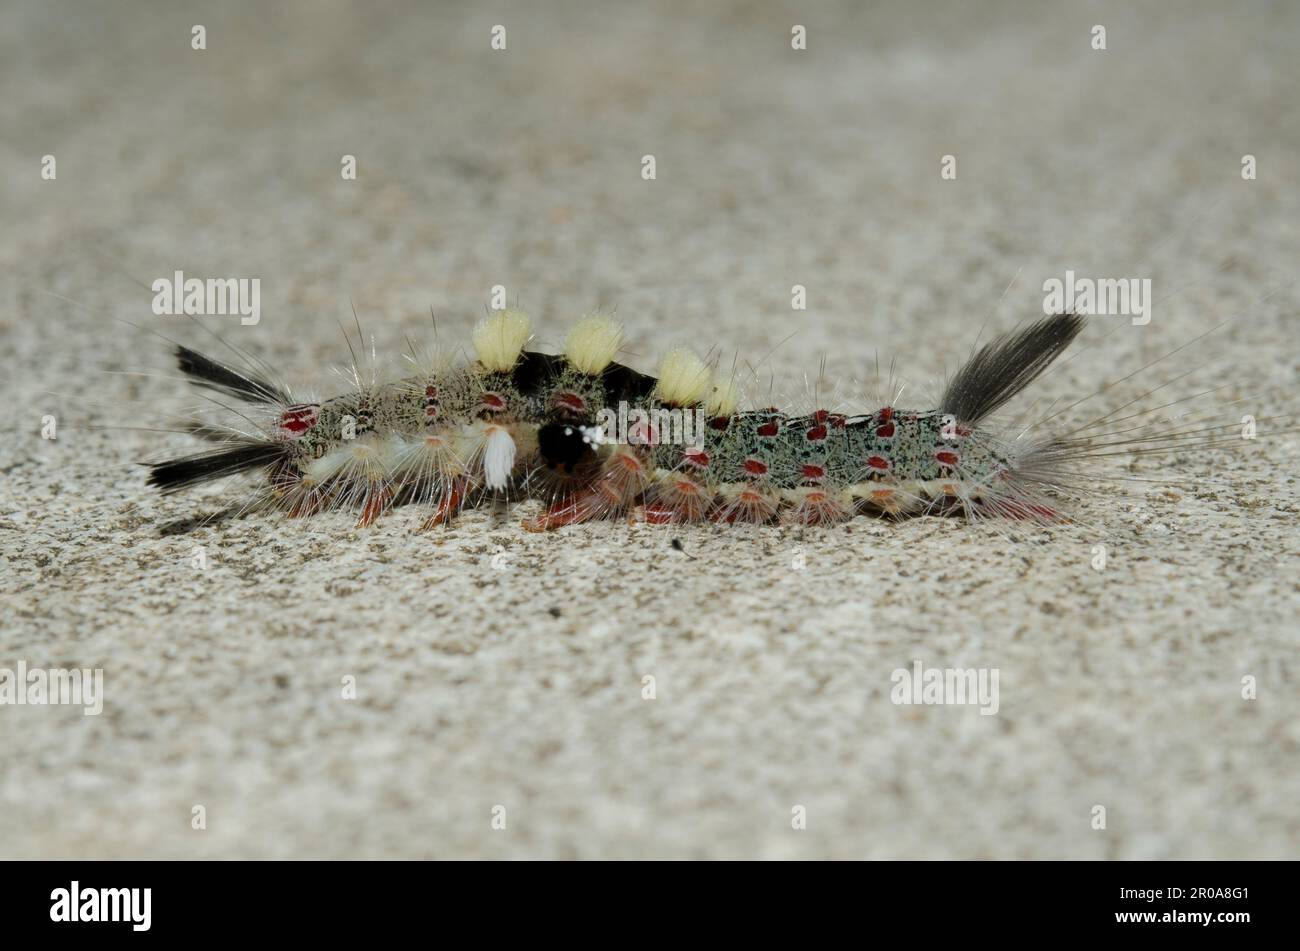 Tussock Moth Caterpillar, Lymantriidae Family, with long hairs for protection on floor, Klungkung, Bali, Indonesia Stock Photo